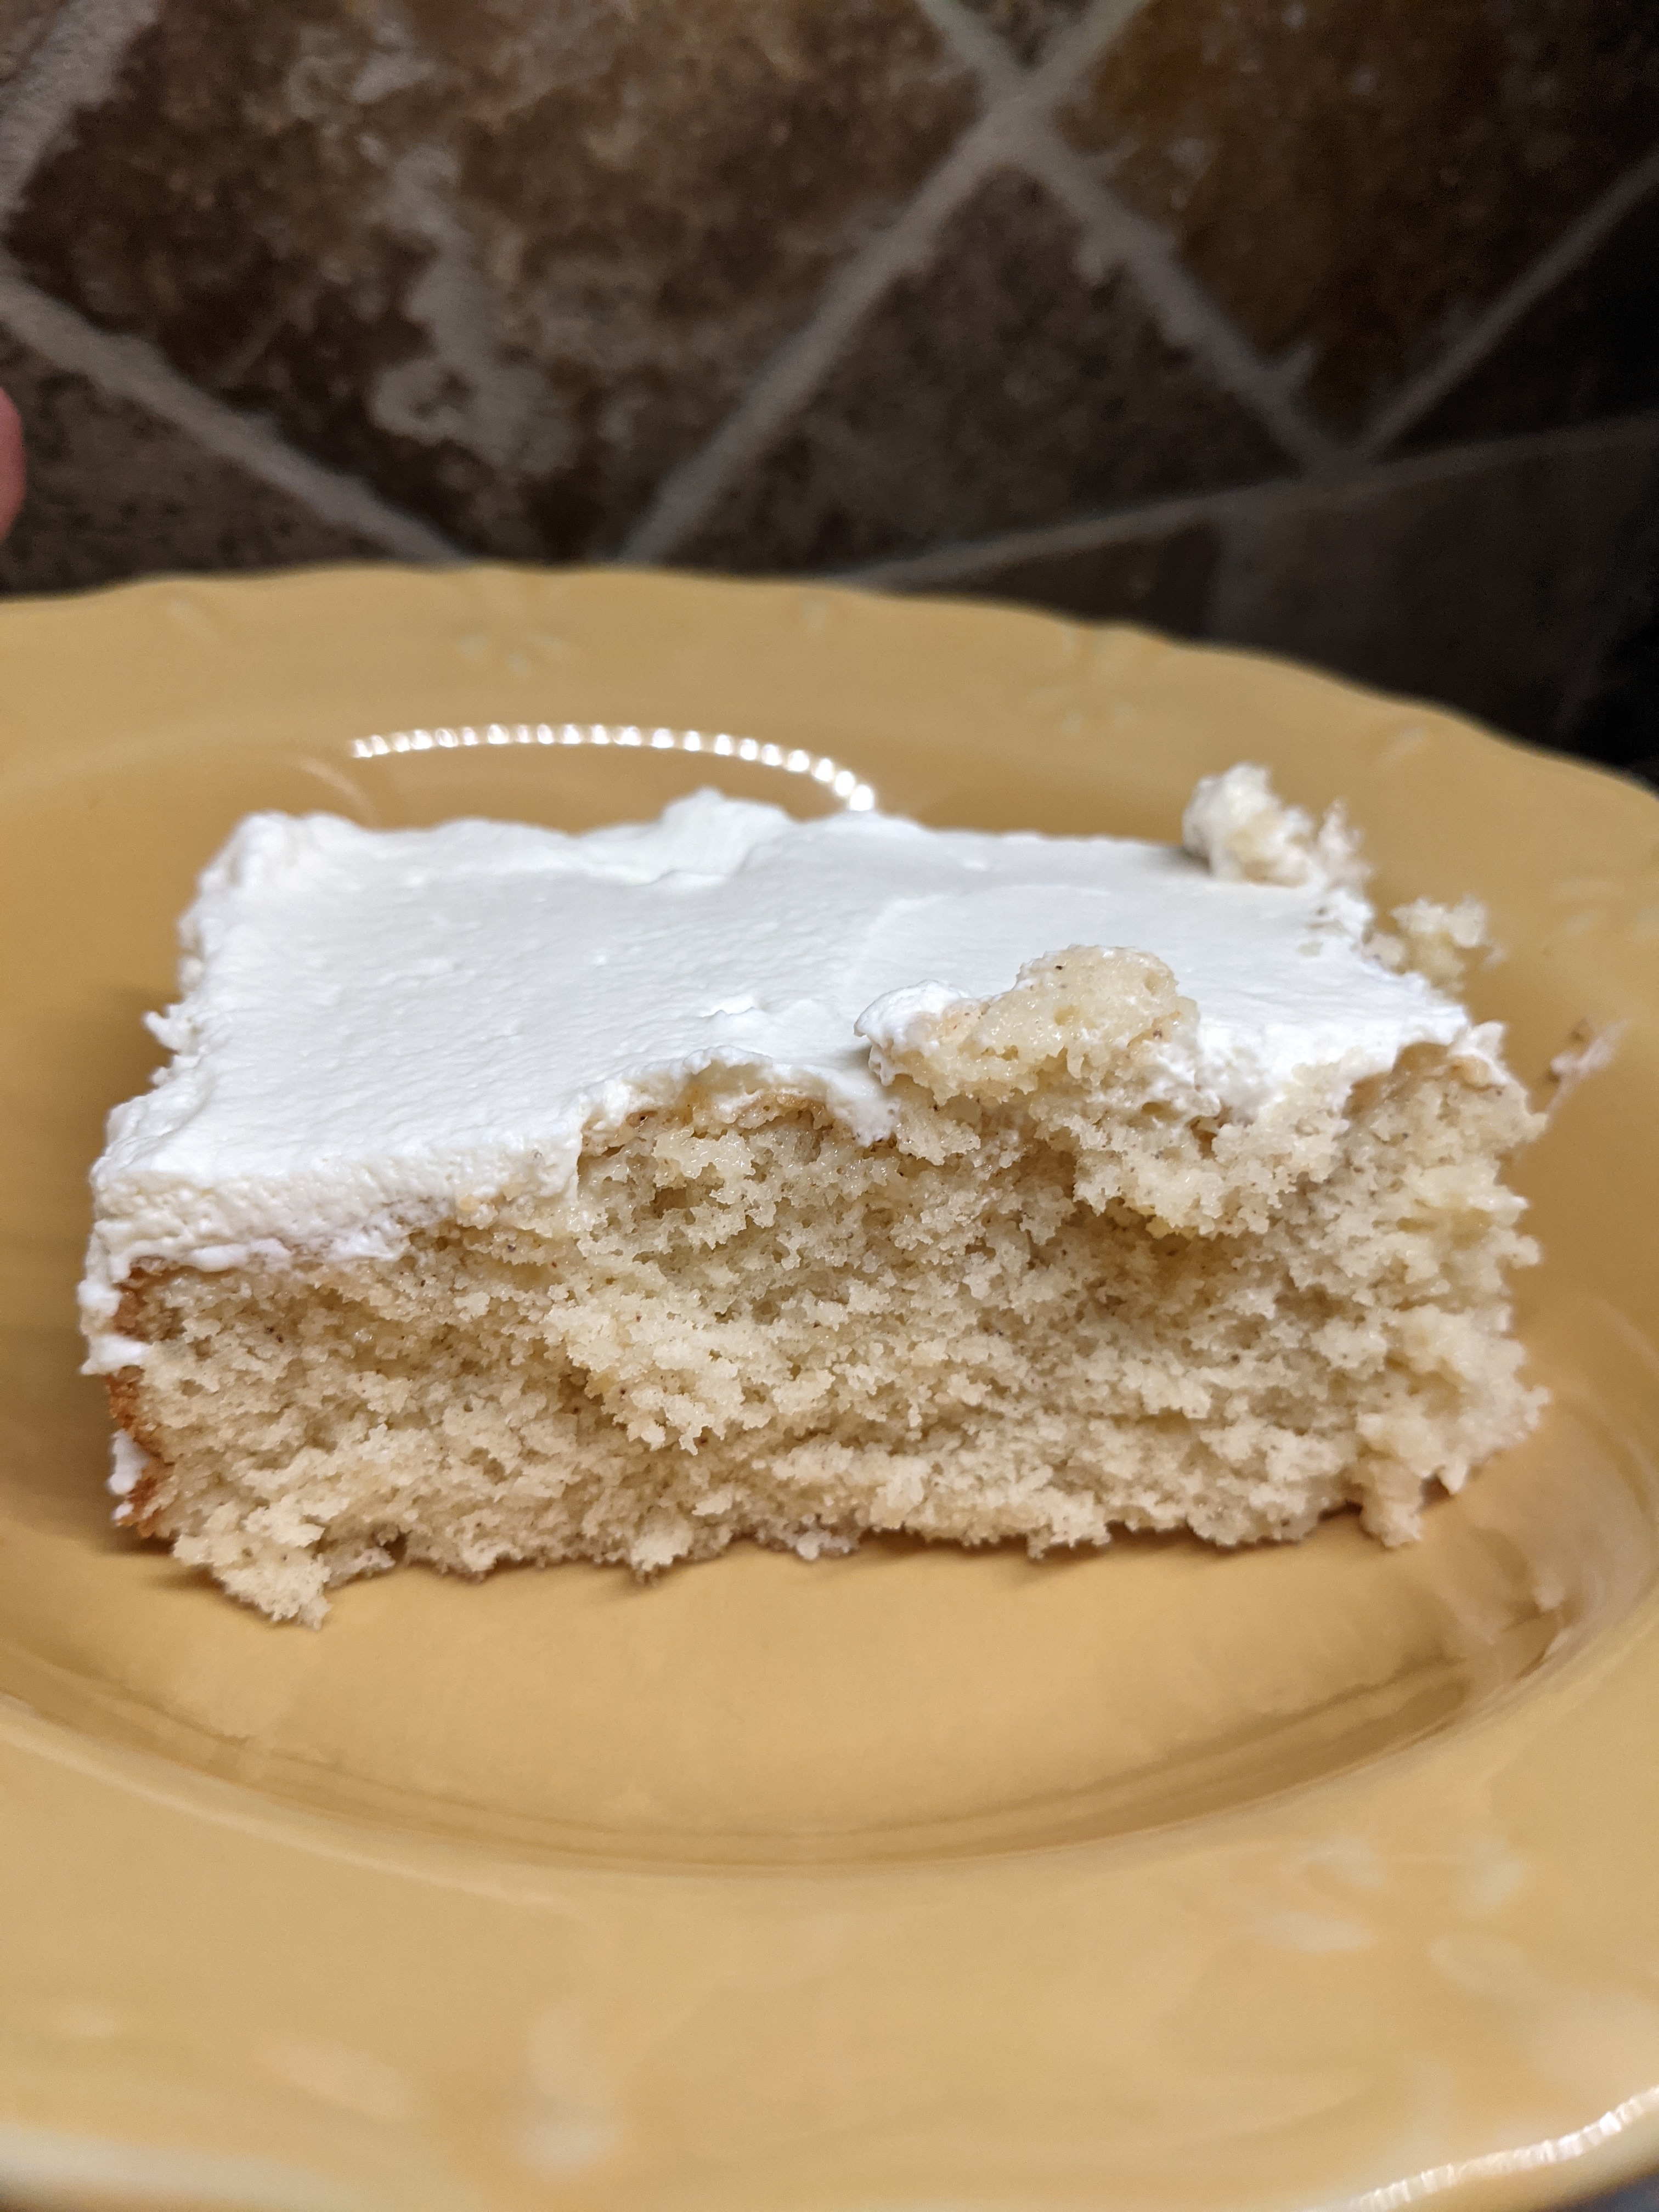 A slice of Tres Leches cake on a yellow plate.